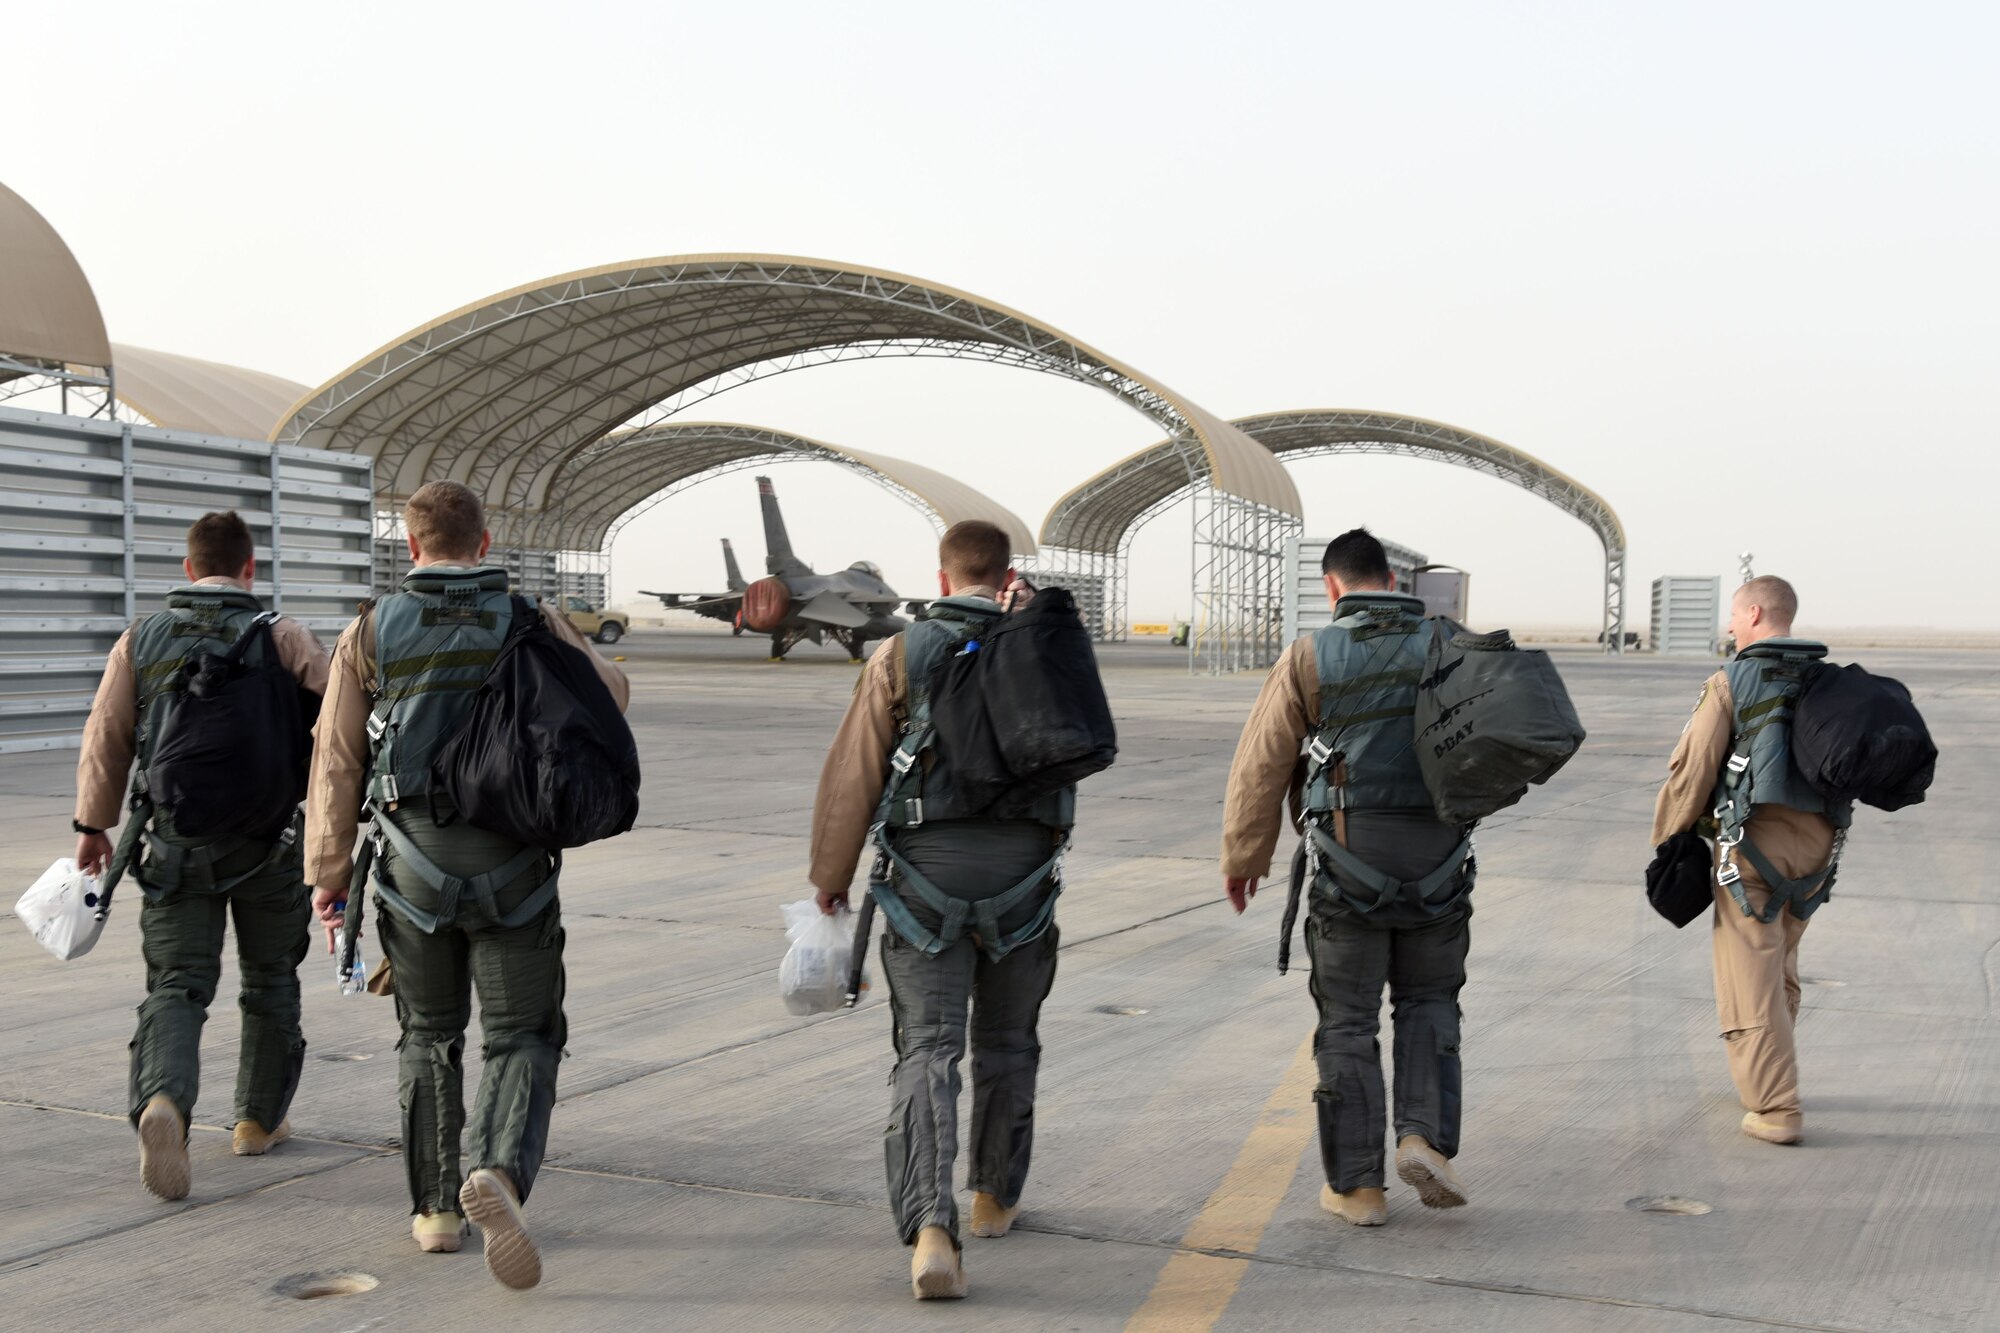 100th Expeditionary Fighter Squadron pilots walk to their F-16 Fight Falcons before returning home at an undisclosed location in Southwest Asia, Jan. 20, 2018. These pilots contributed to dropping 105 bombs in the fight against ISIS. (U.S. Air Force photo by Staff Sgt. Joshua Edwards/Released)